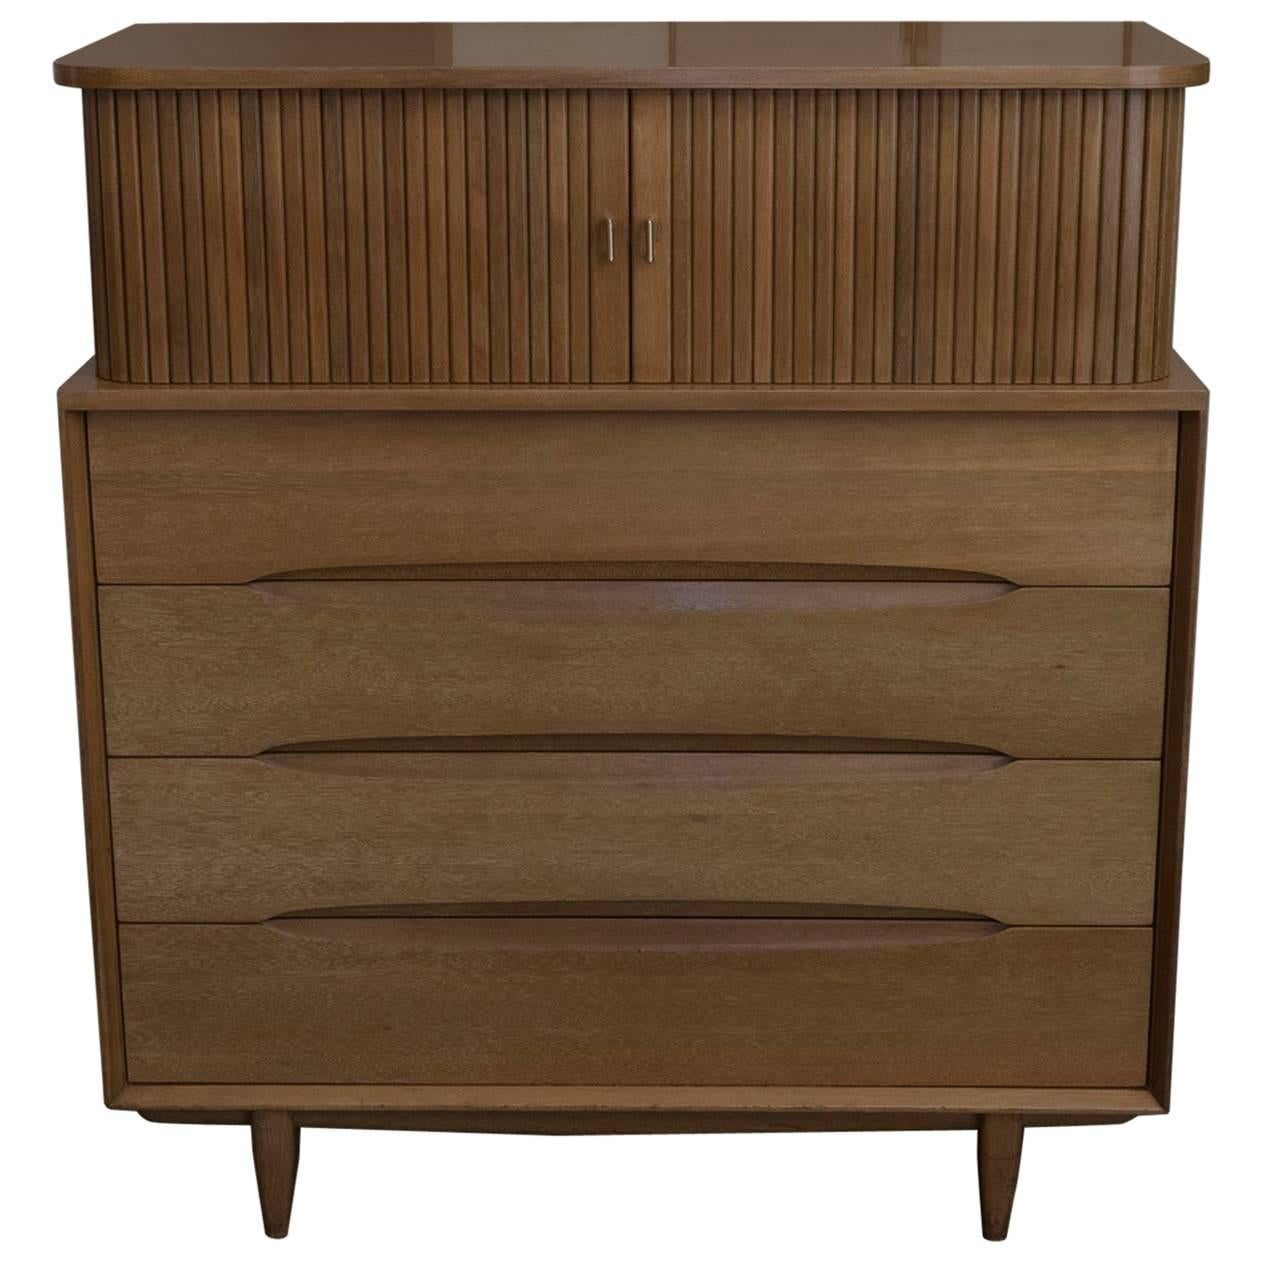 1950s Mahogany Tall Dresser with Tambour Doors by Brown Saltman